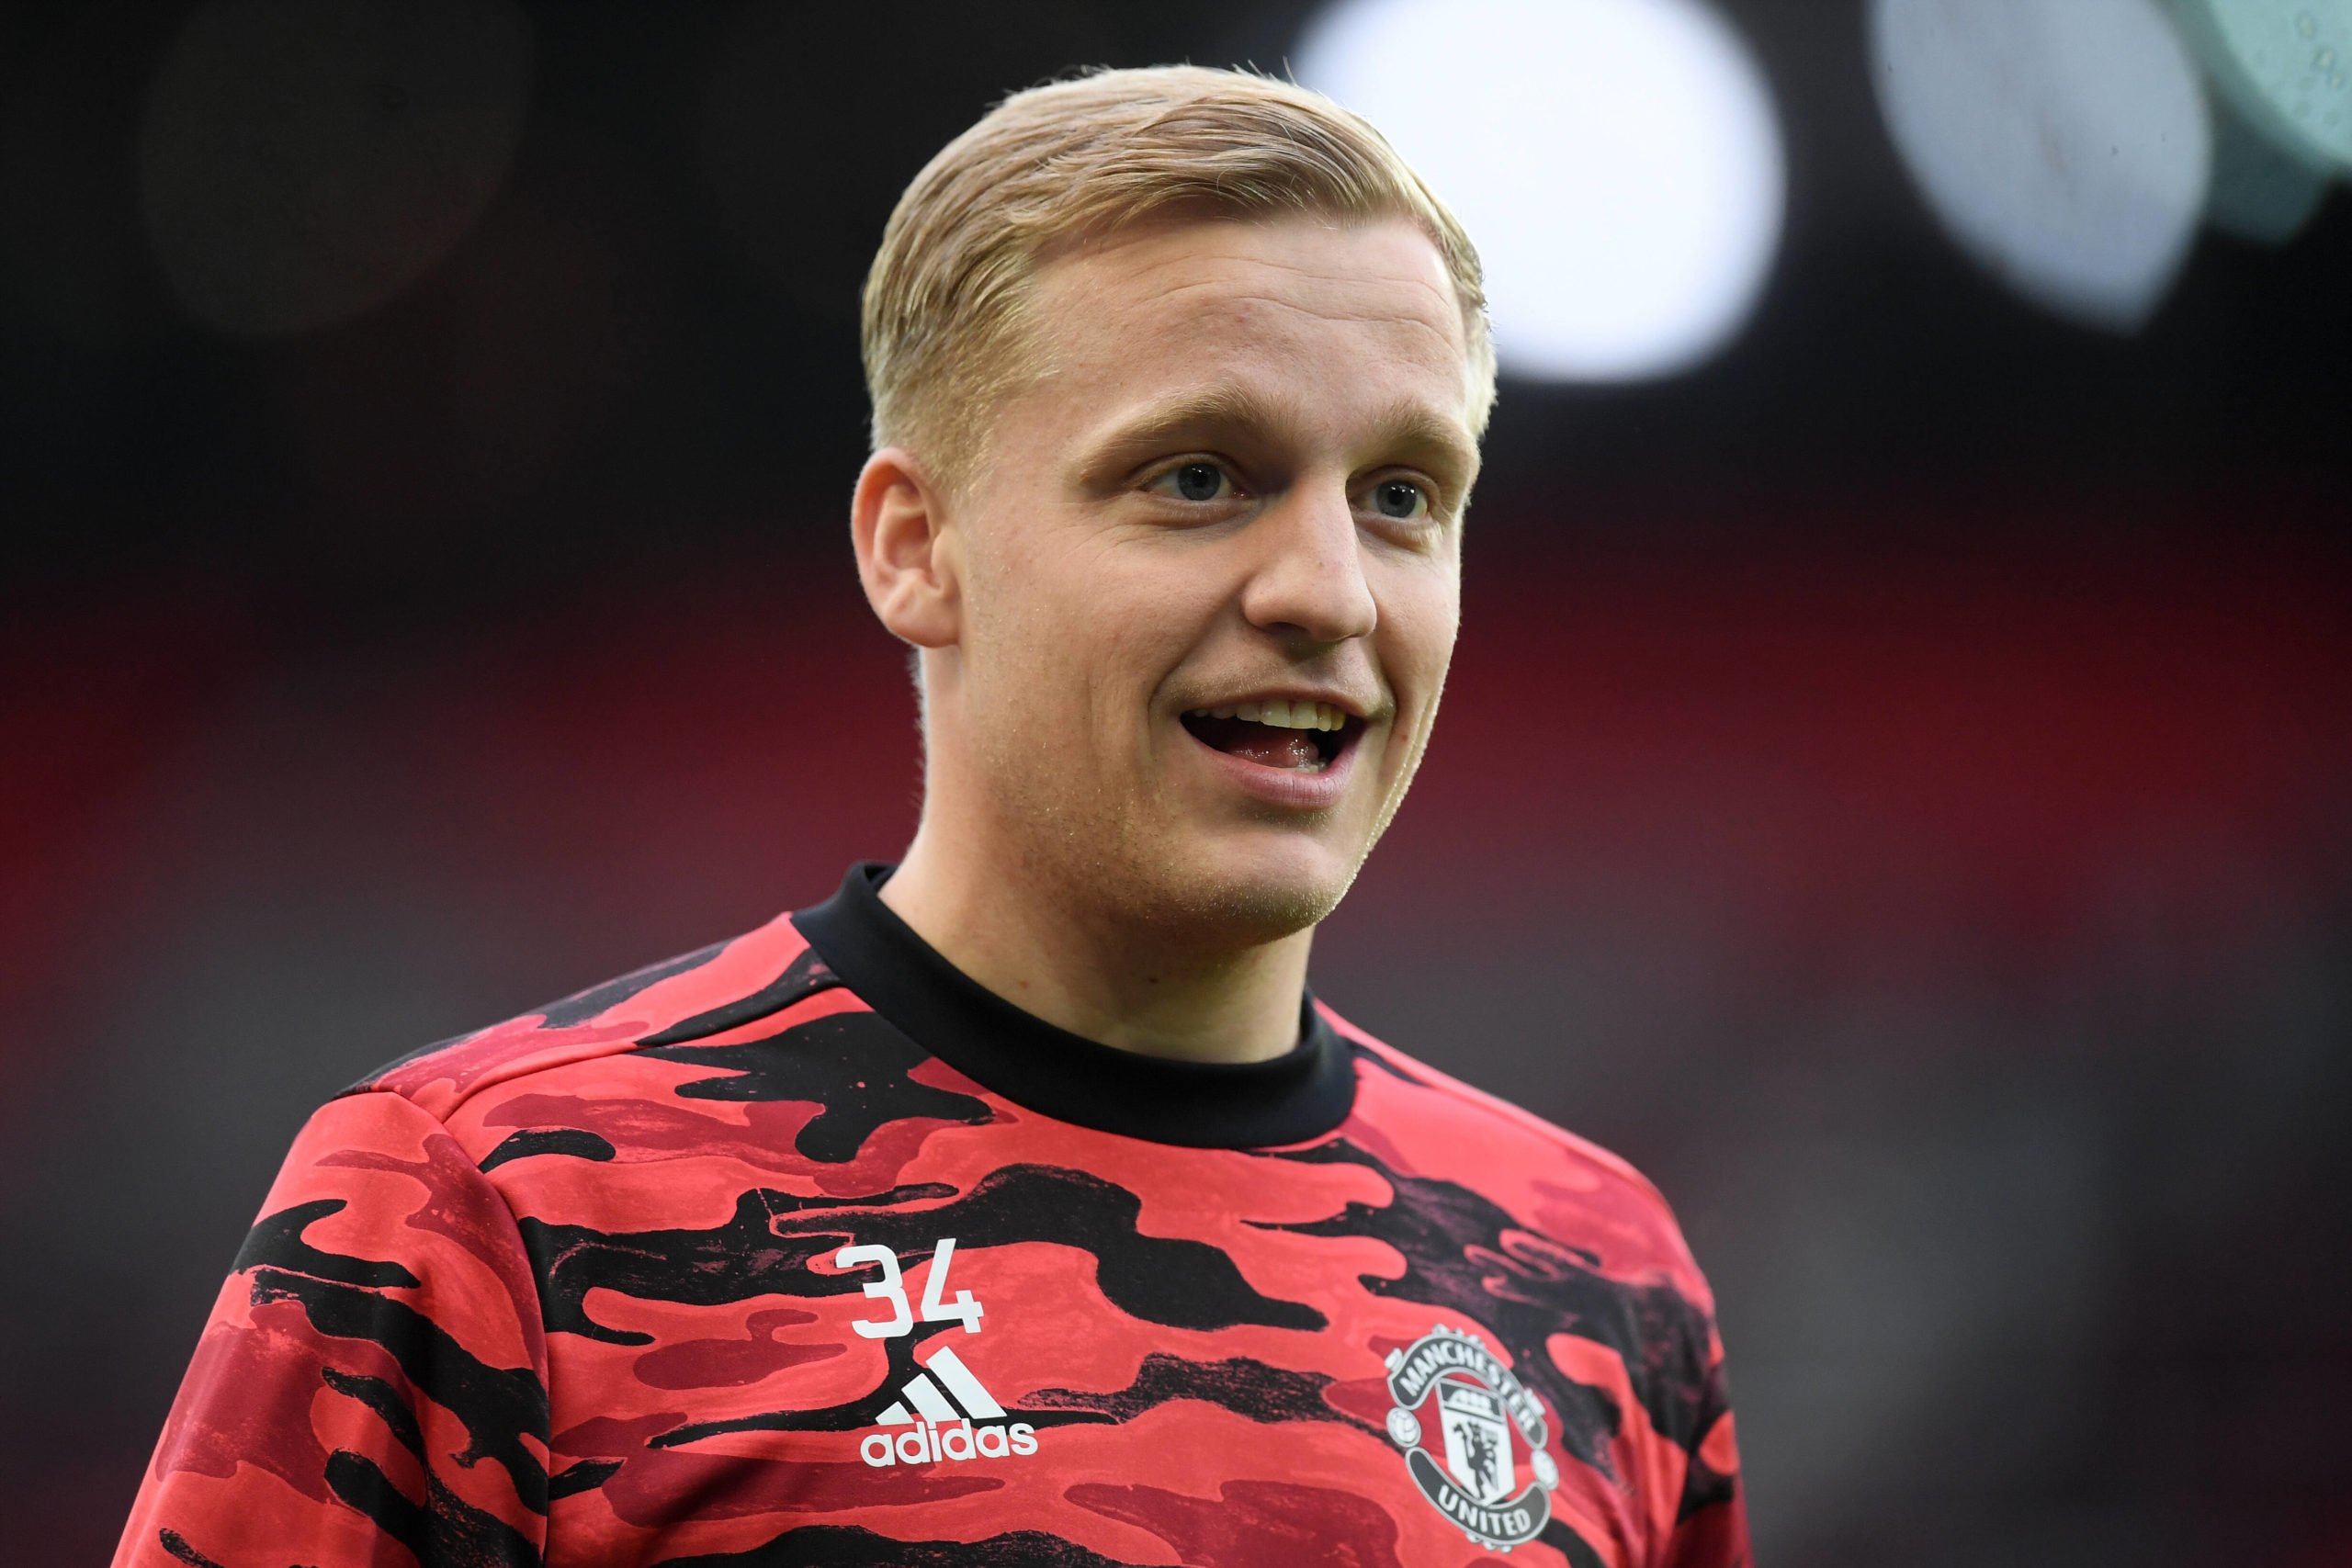 Everton could reignite their interest in van de Beek who is seen in the picture